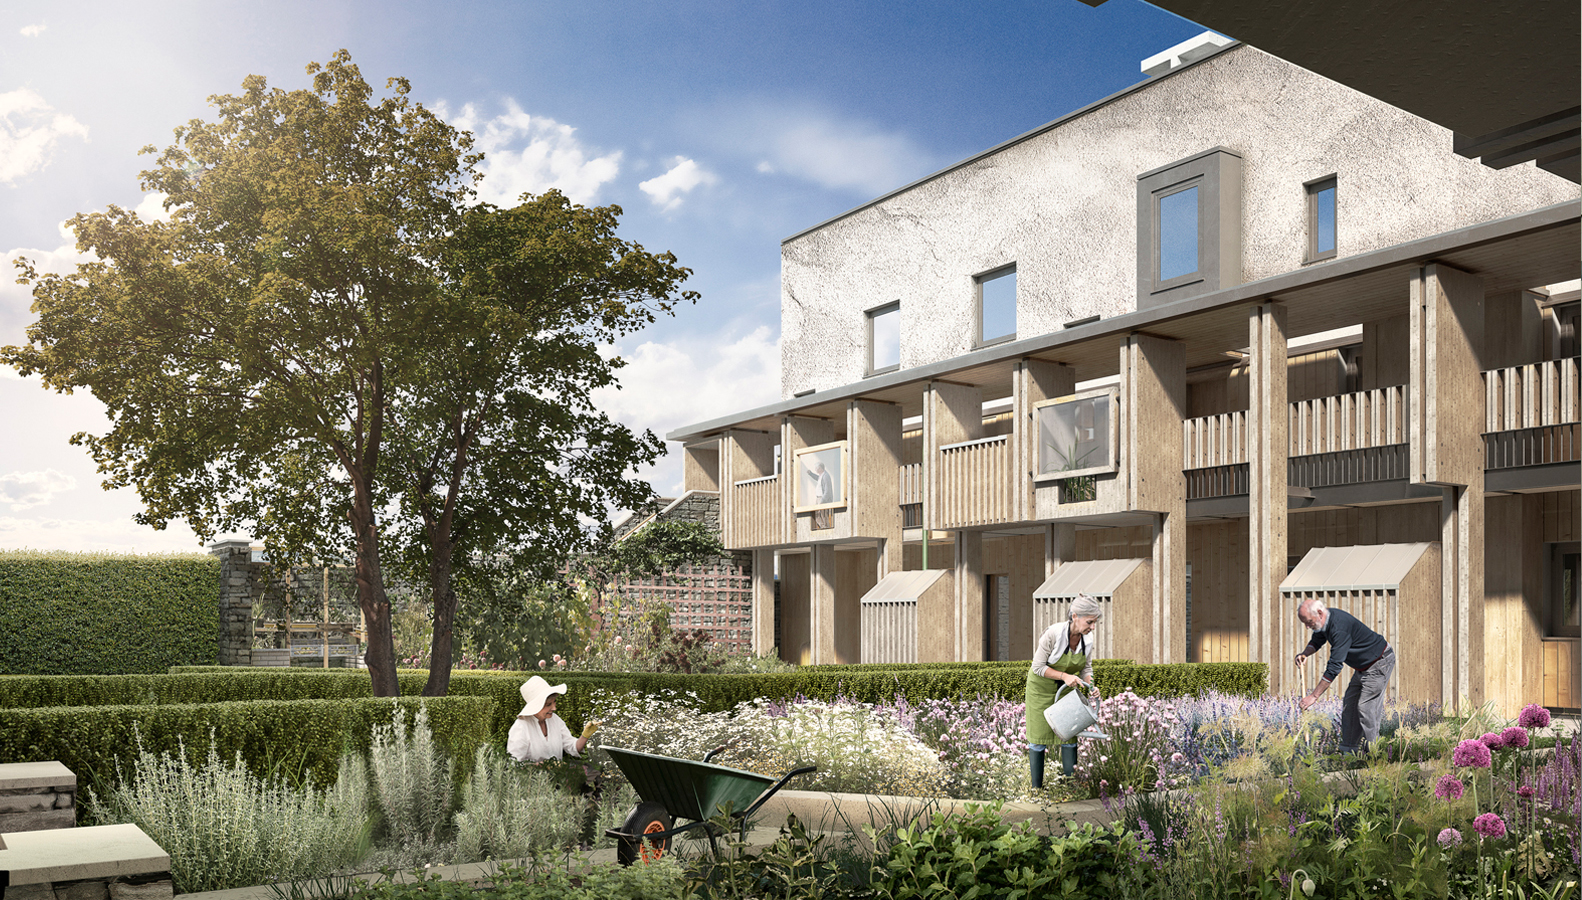 Age-friendly housing design is maturing